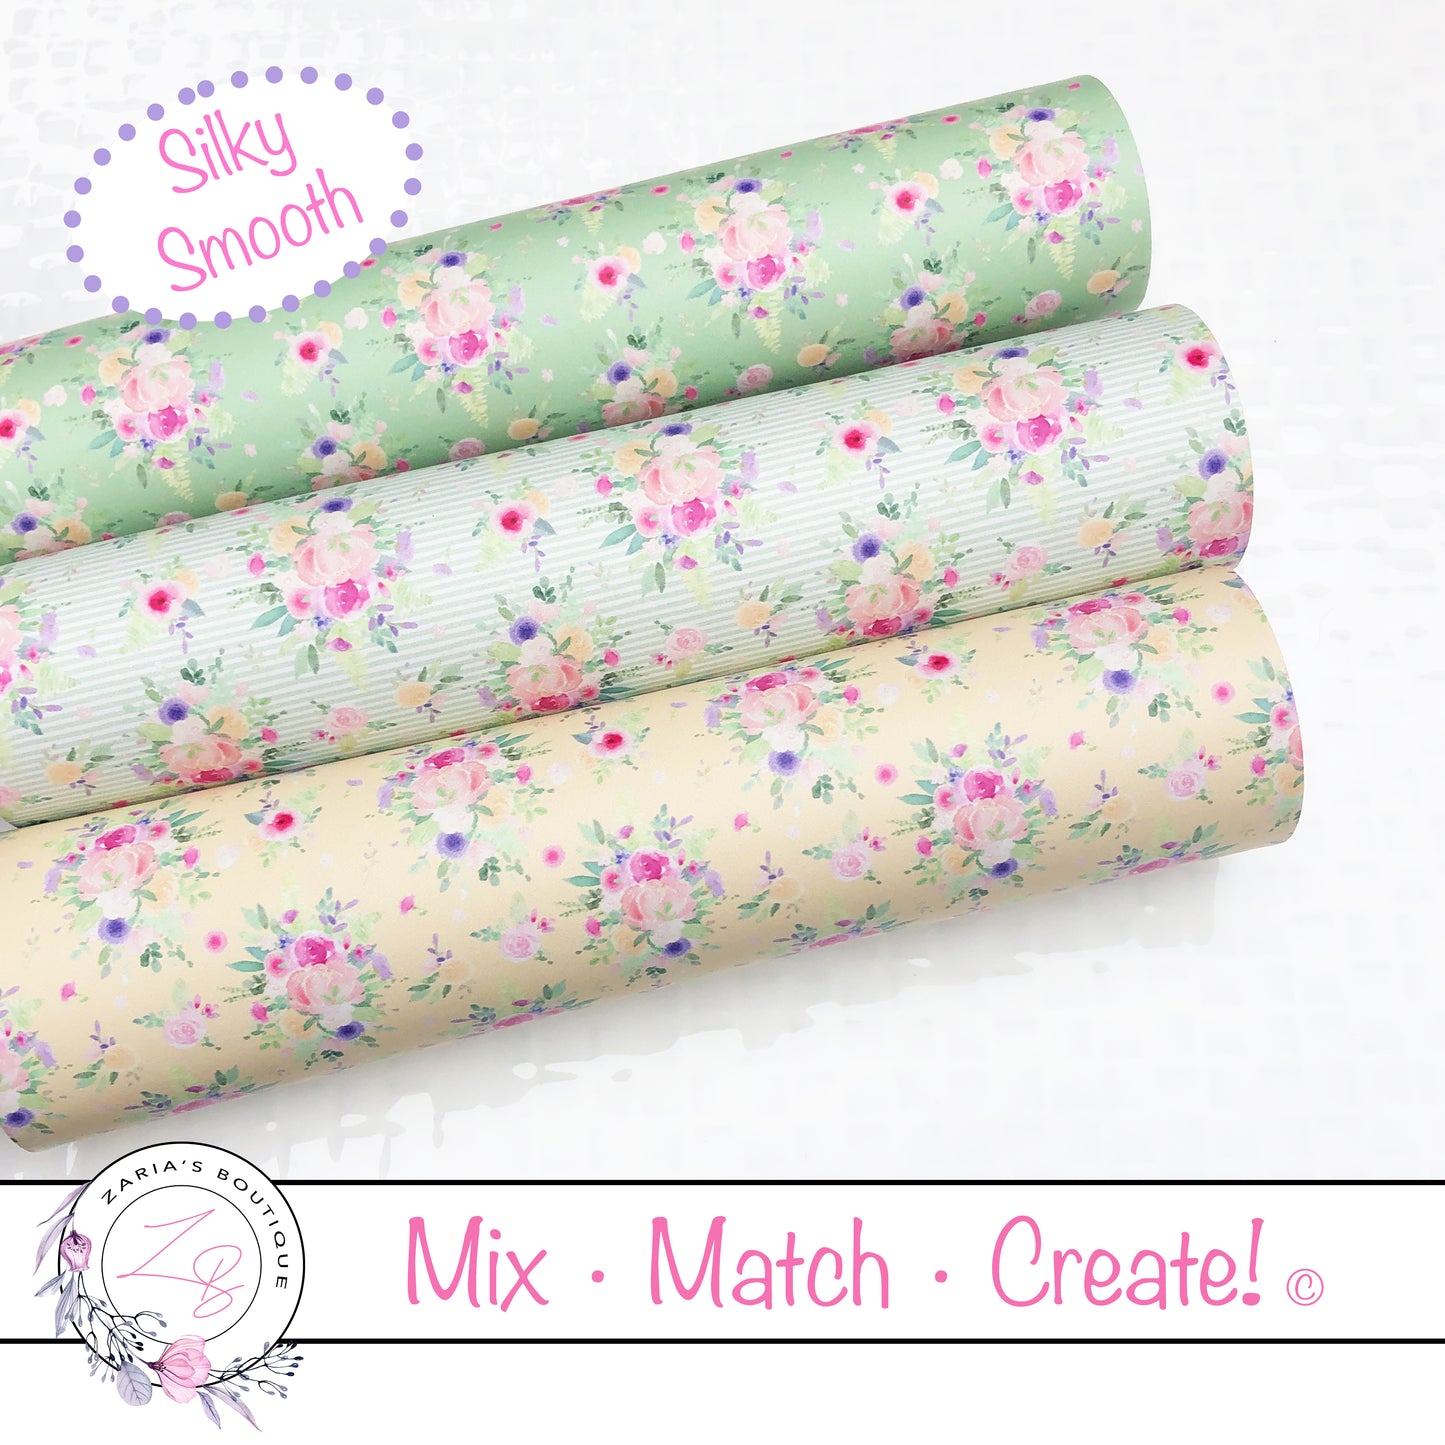 Mix ⋅ Match ⋅ Create © Minty Floral ⋅ Vegan Faux Leather & Glitter ⋅ Single Sheets & Multi-Packs